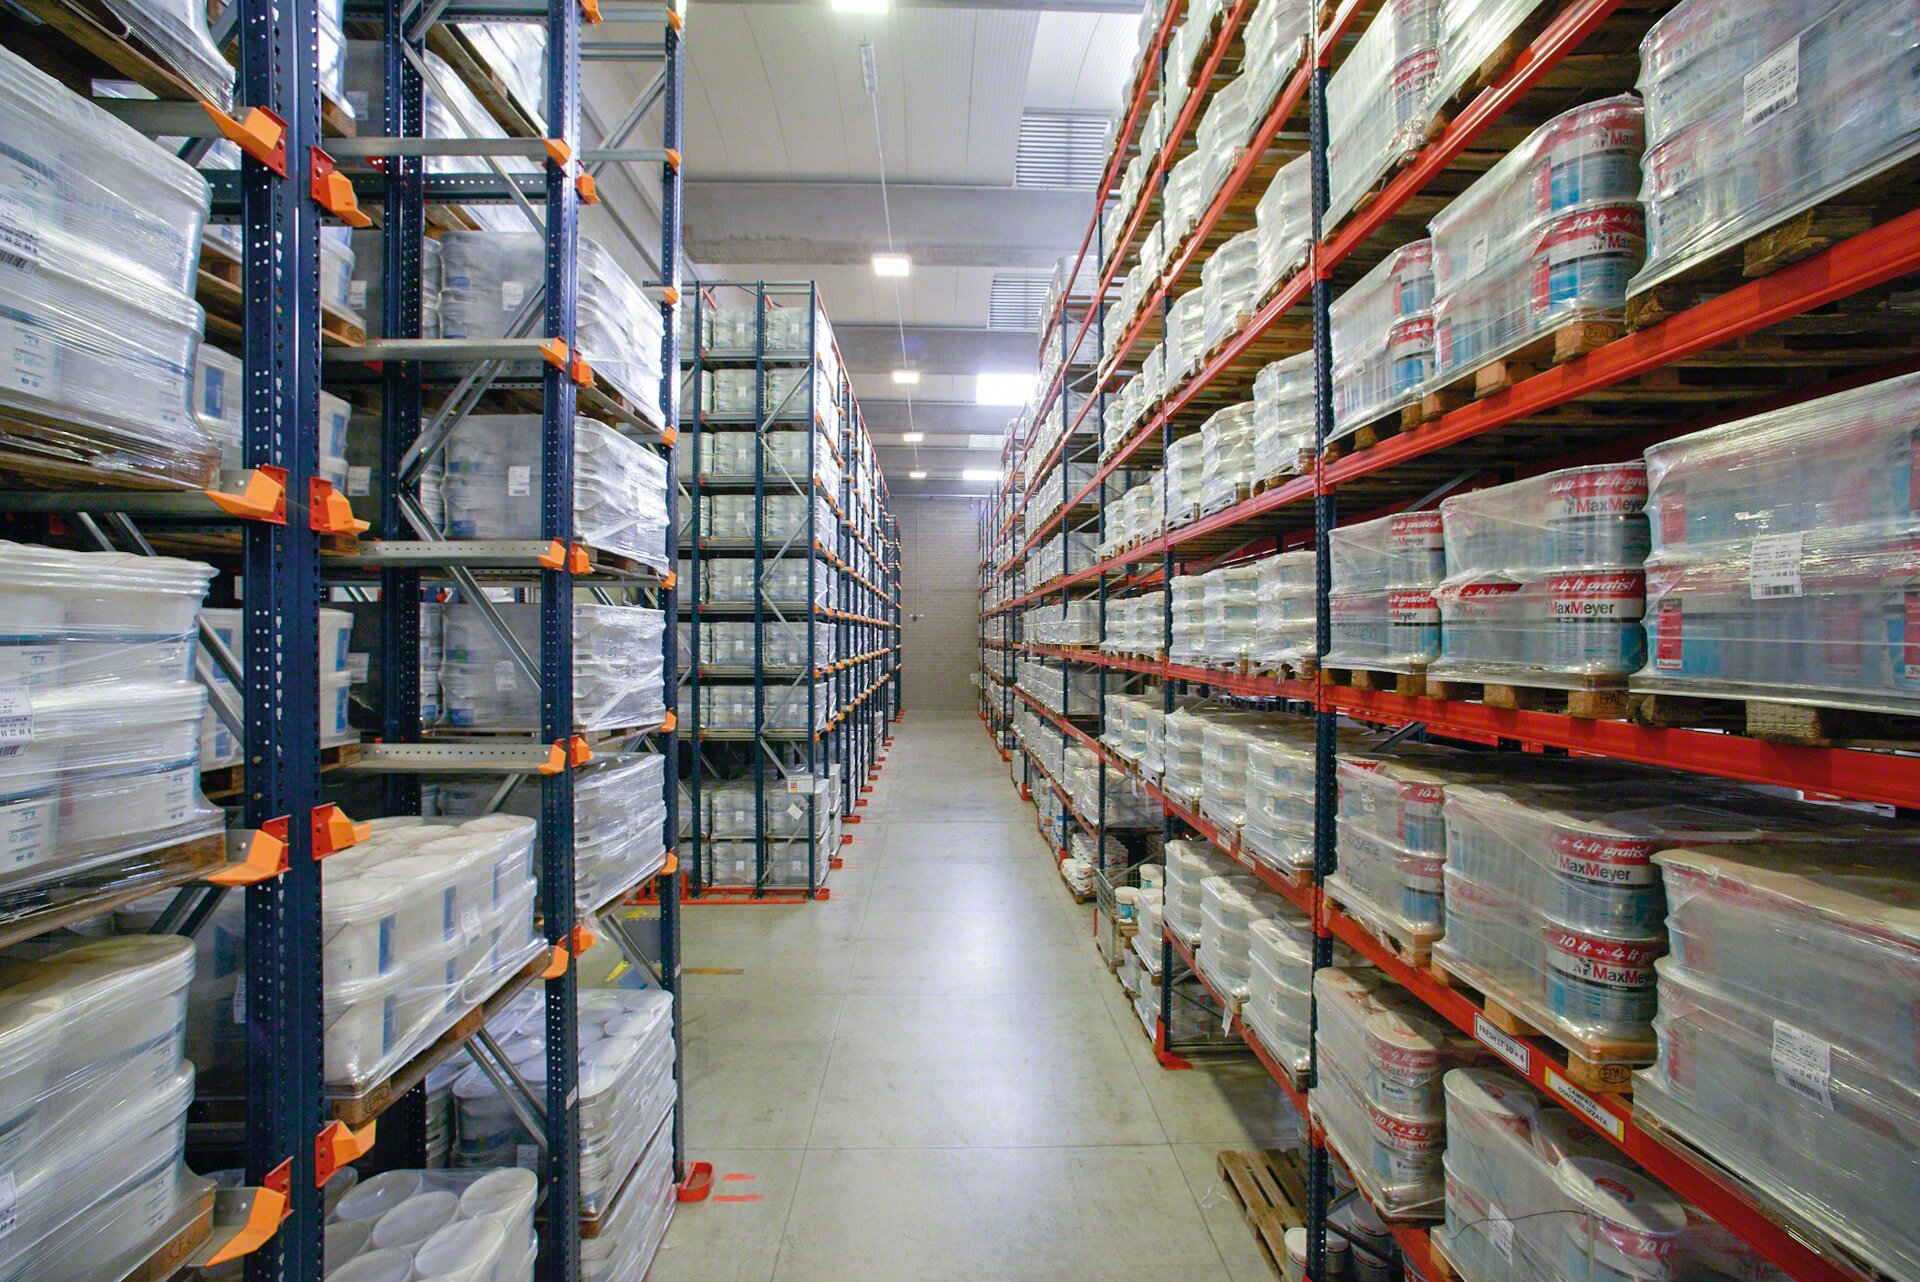 This installation combines selective pallet rack with high-density drive-in racking